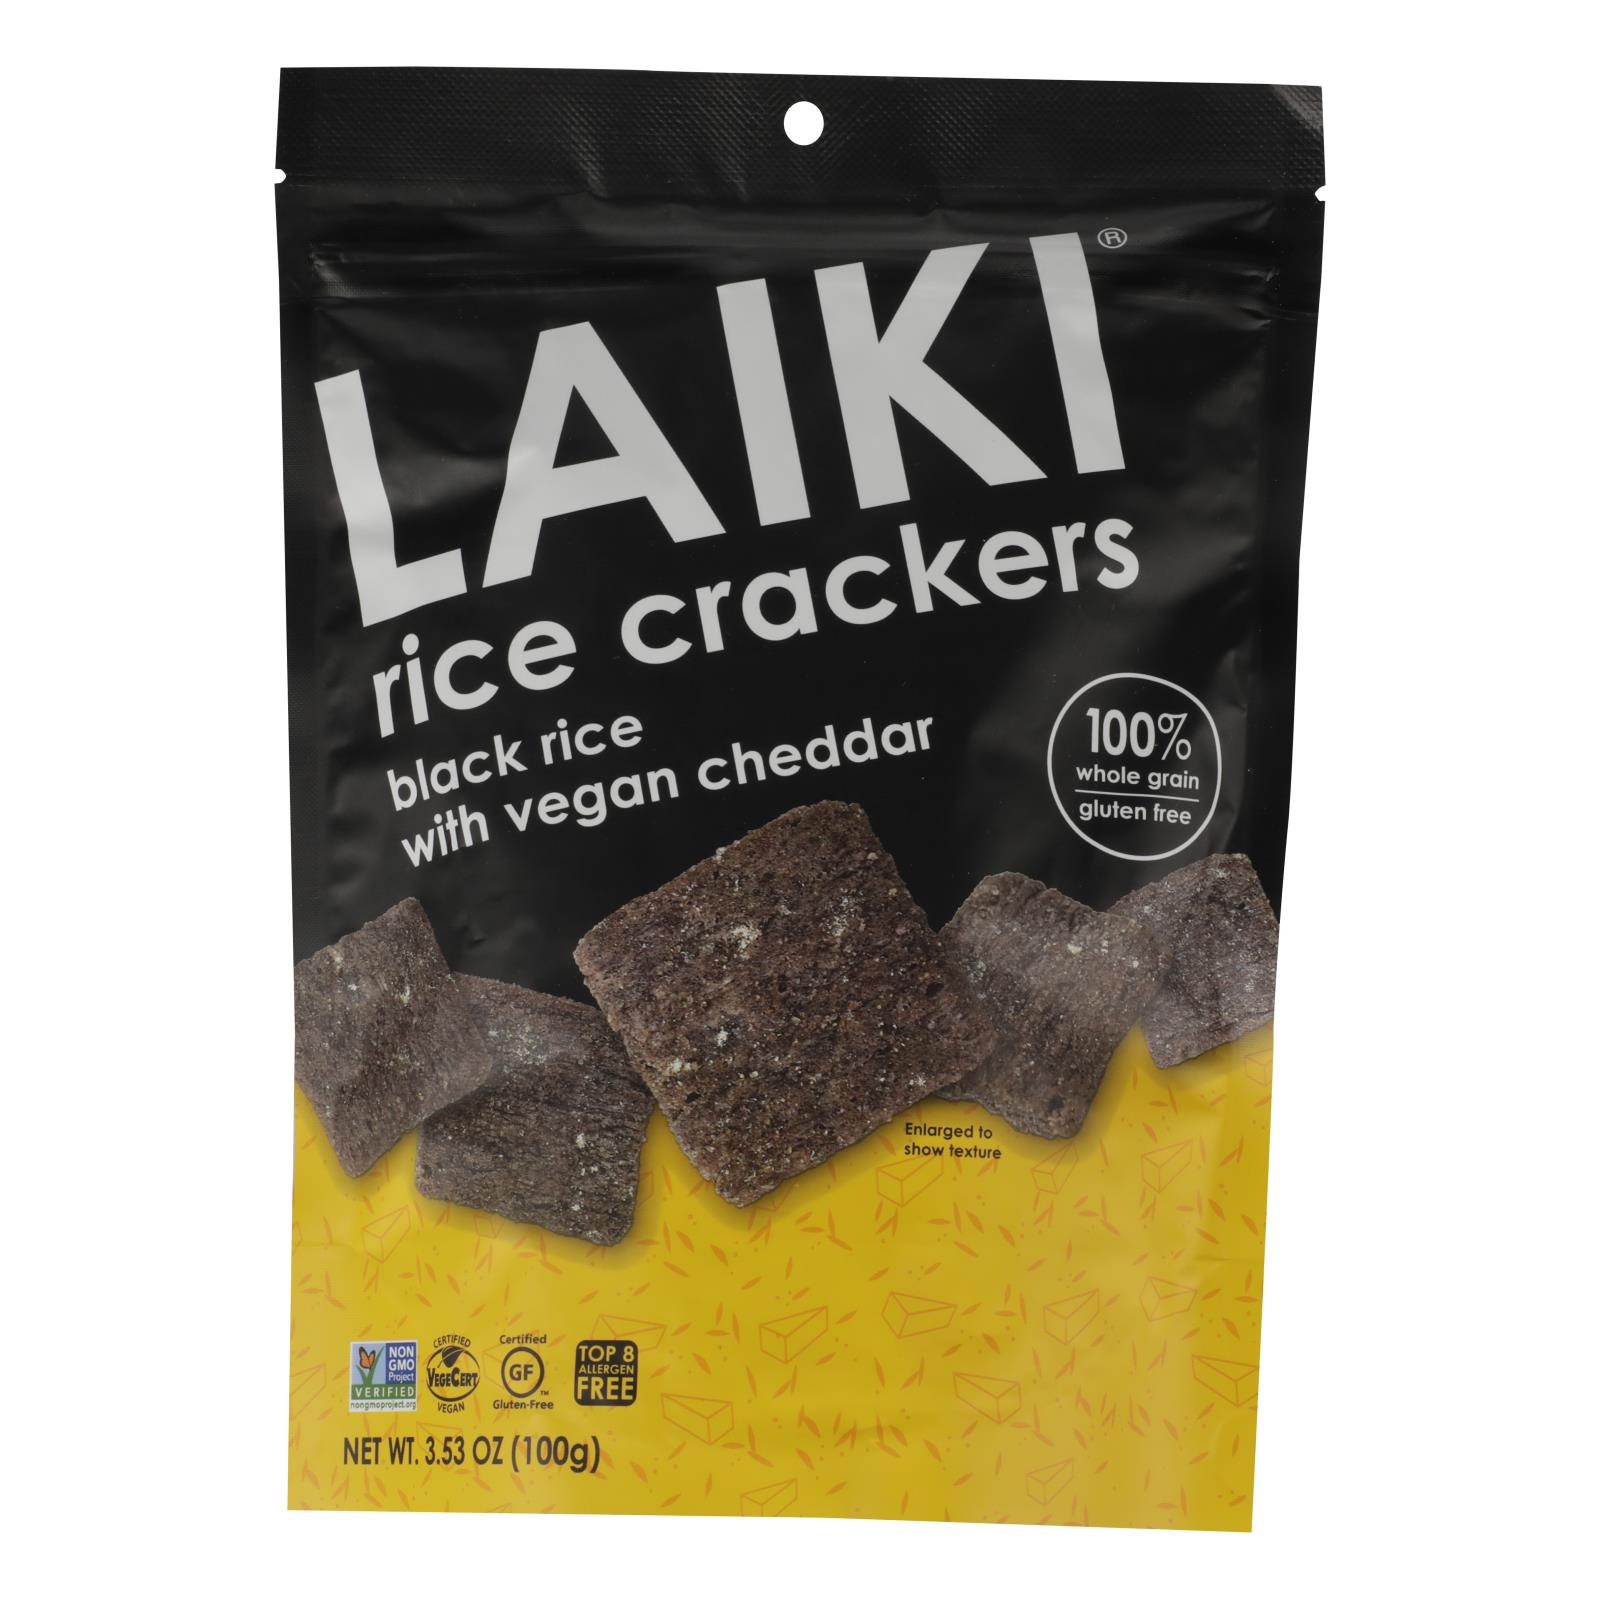 Laiki - Crackers Black Rice Vgn Ched - Case of 8 - 3.53 OZ